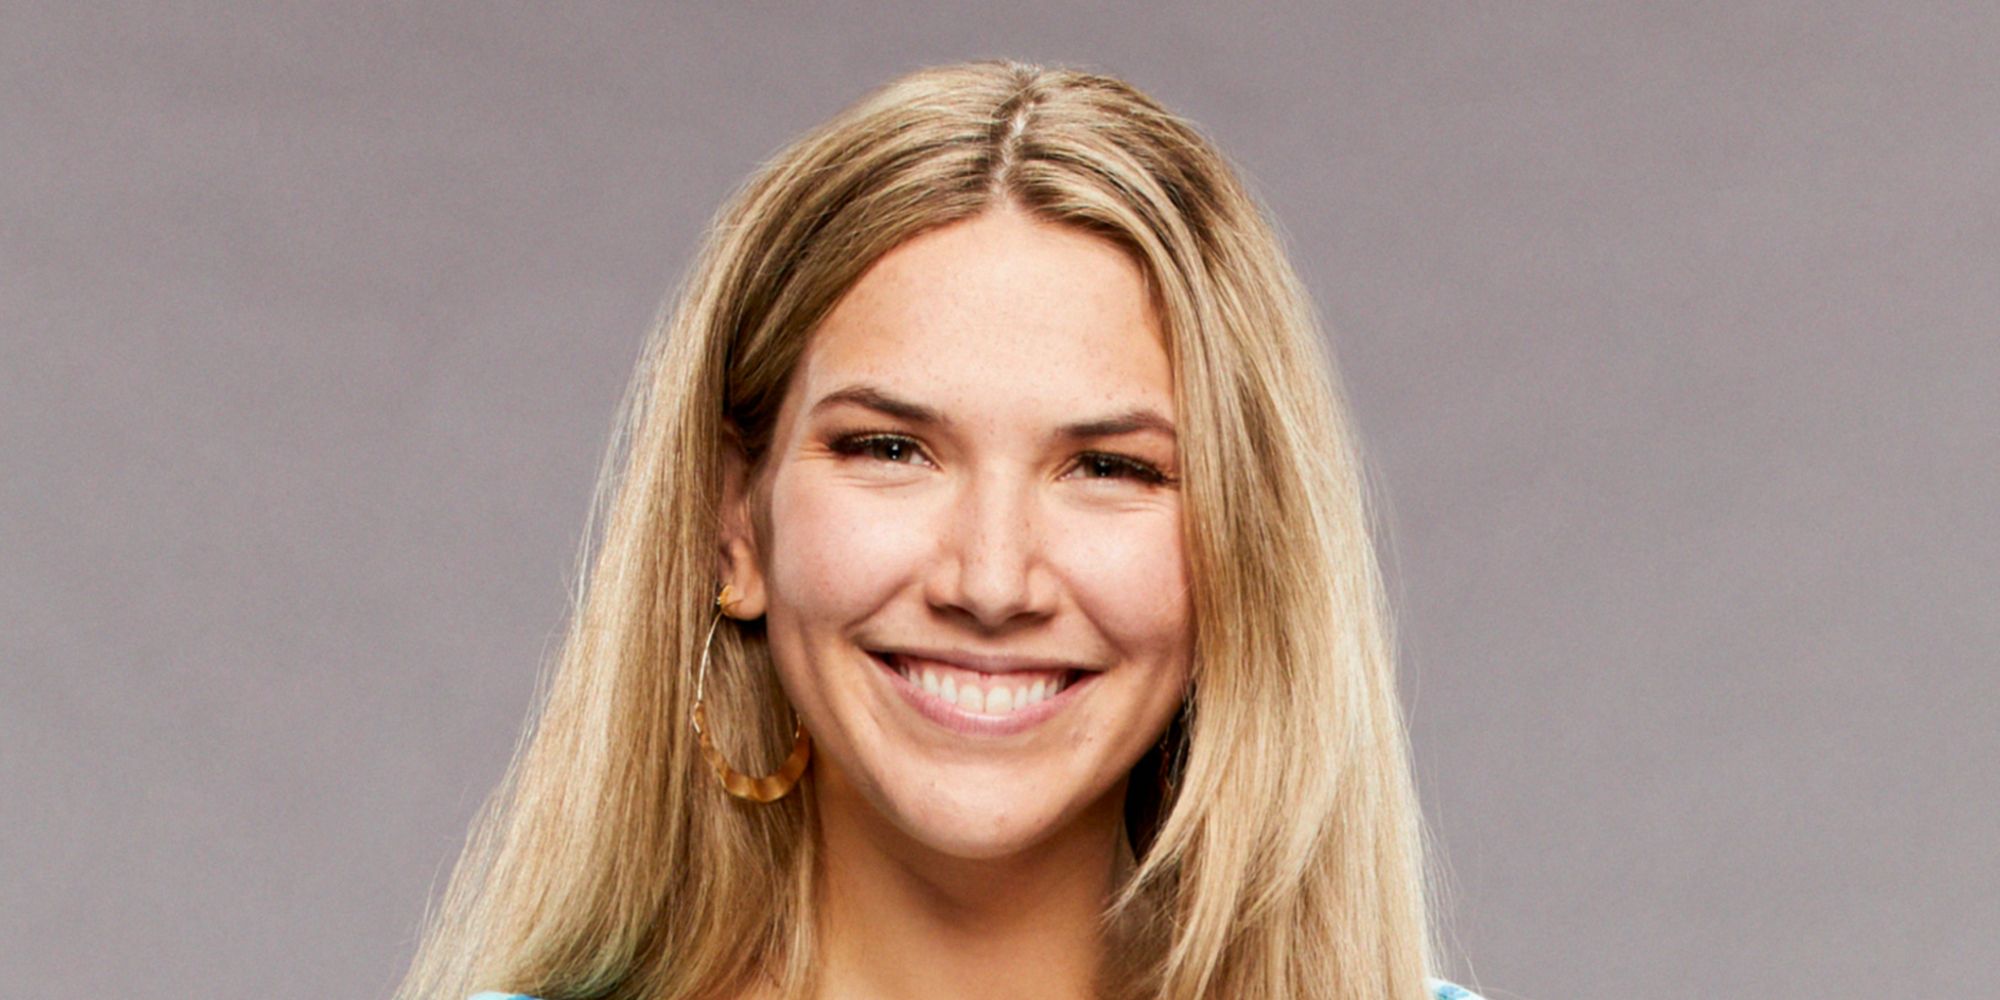 Claire Rehfuss on Big Brother 23